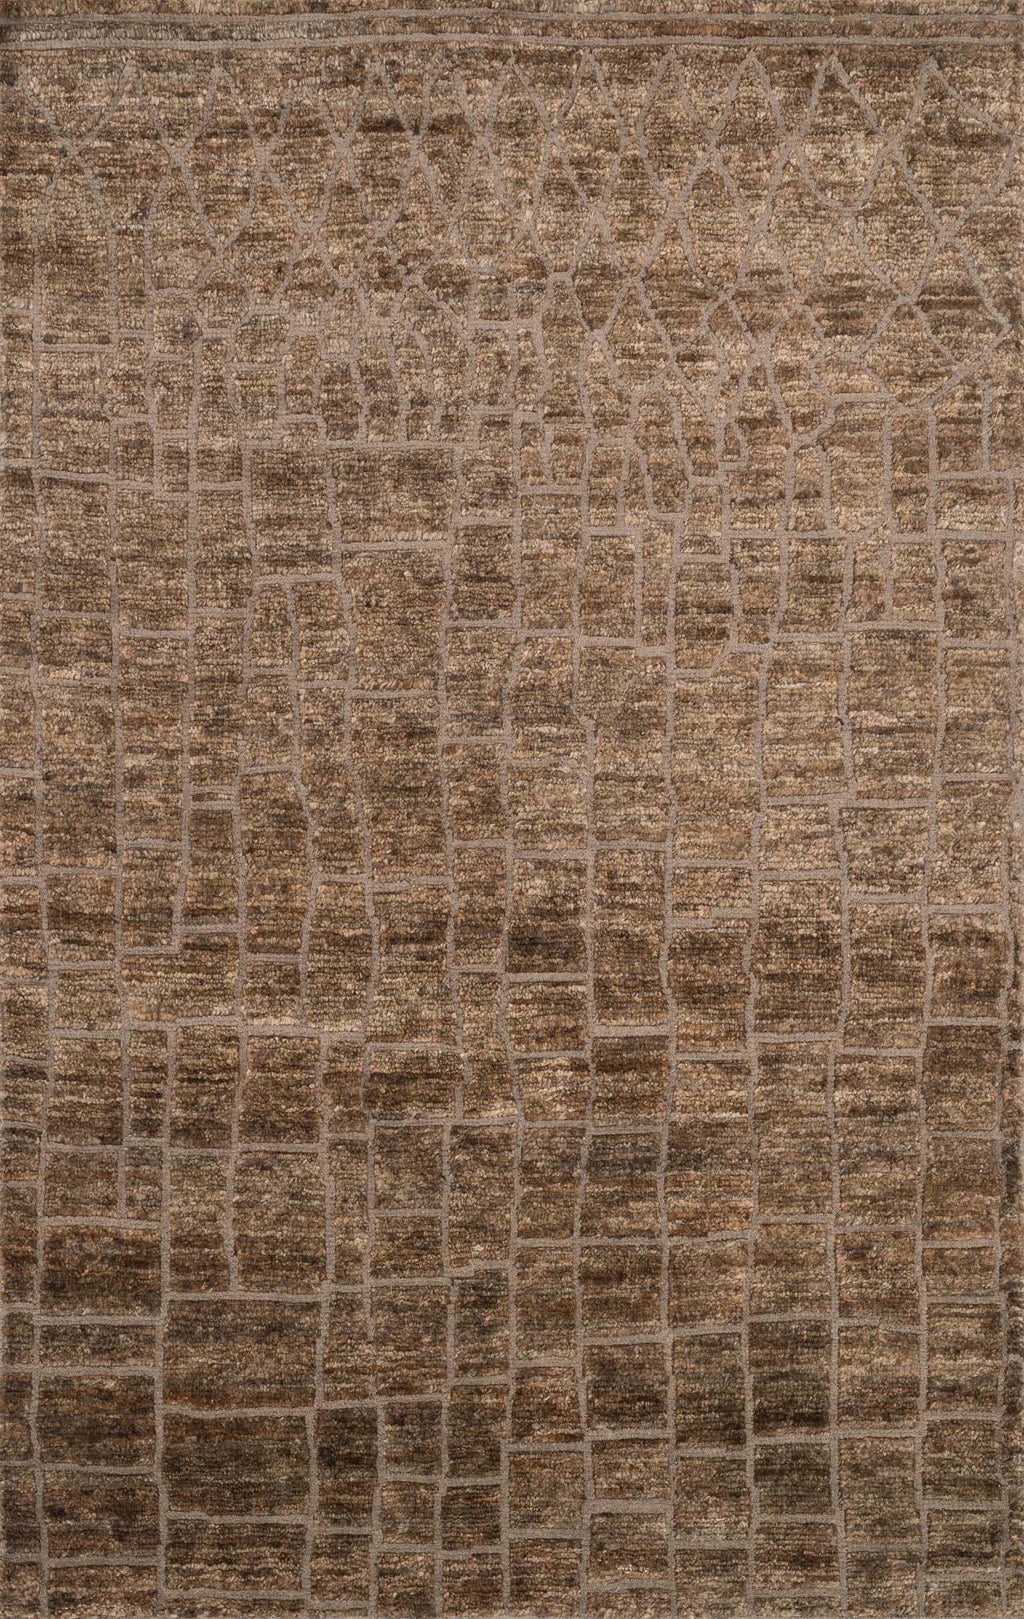 SAHARA Collection Rug  in  TAN Beige Medium Hand-Knotted Jute/Wool